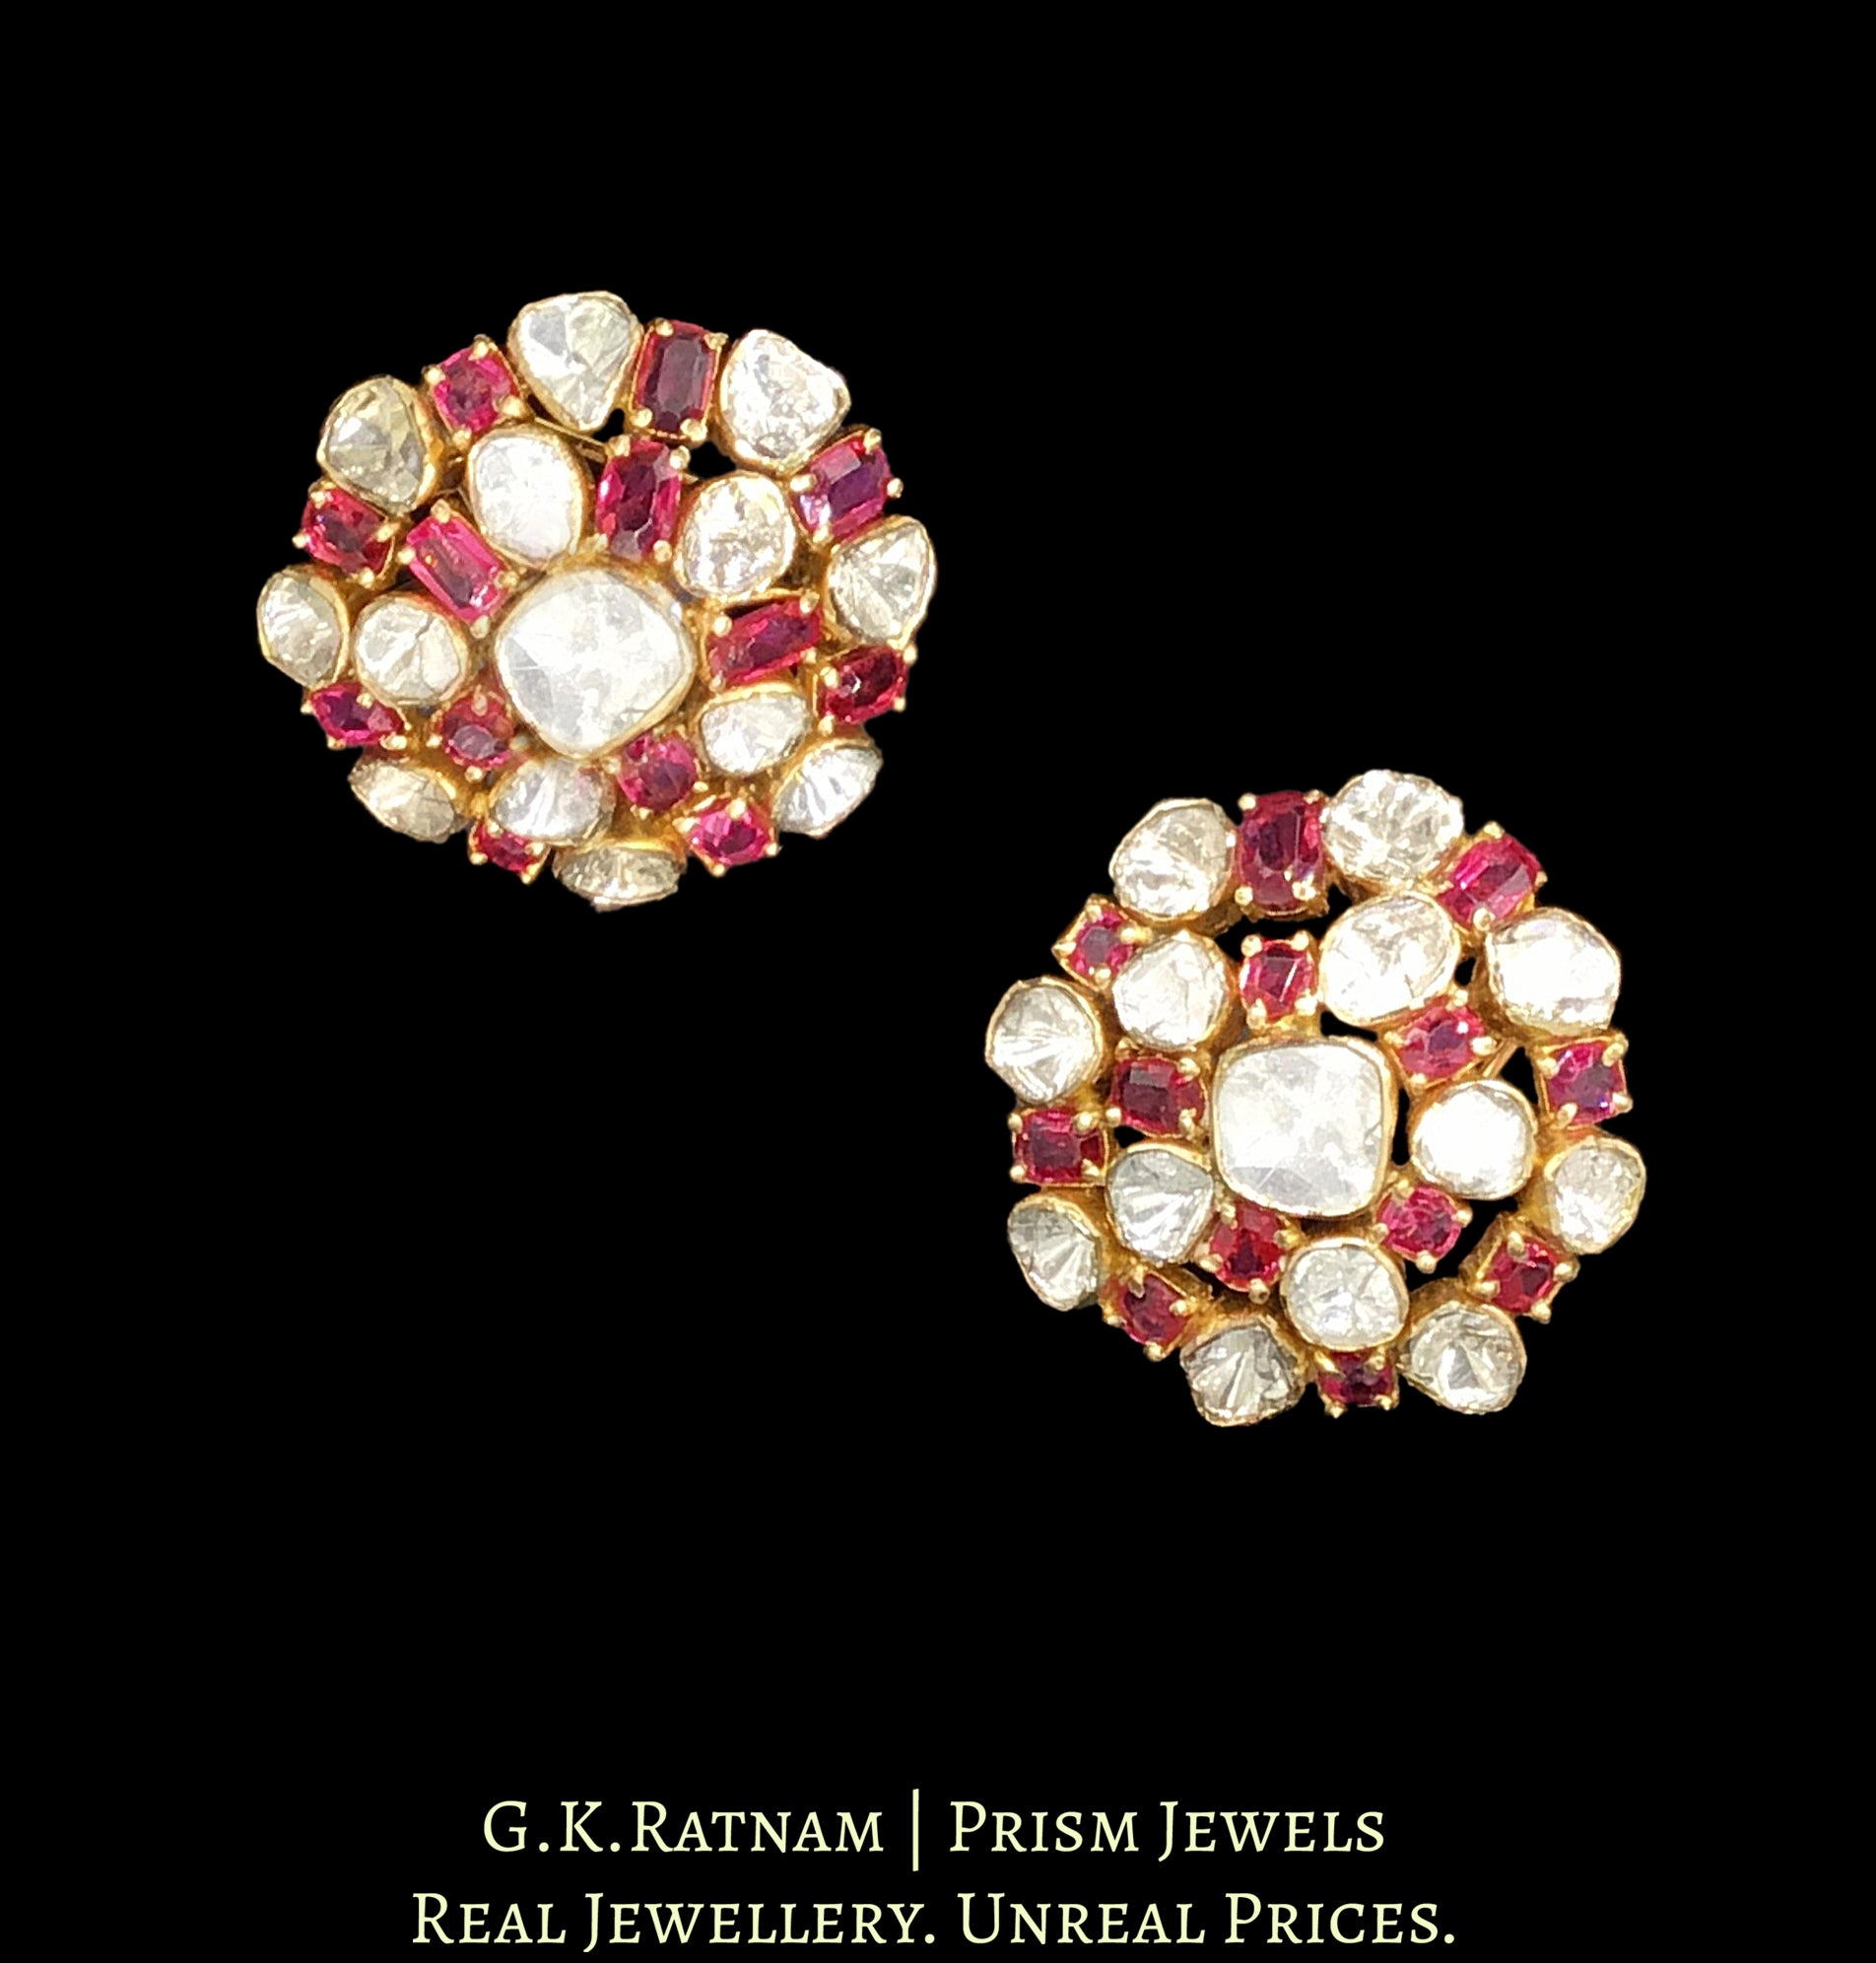 18k Gold and Diamond Polki Open Setting Karanphool Earring Pair with Spinels